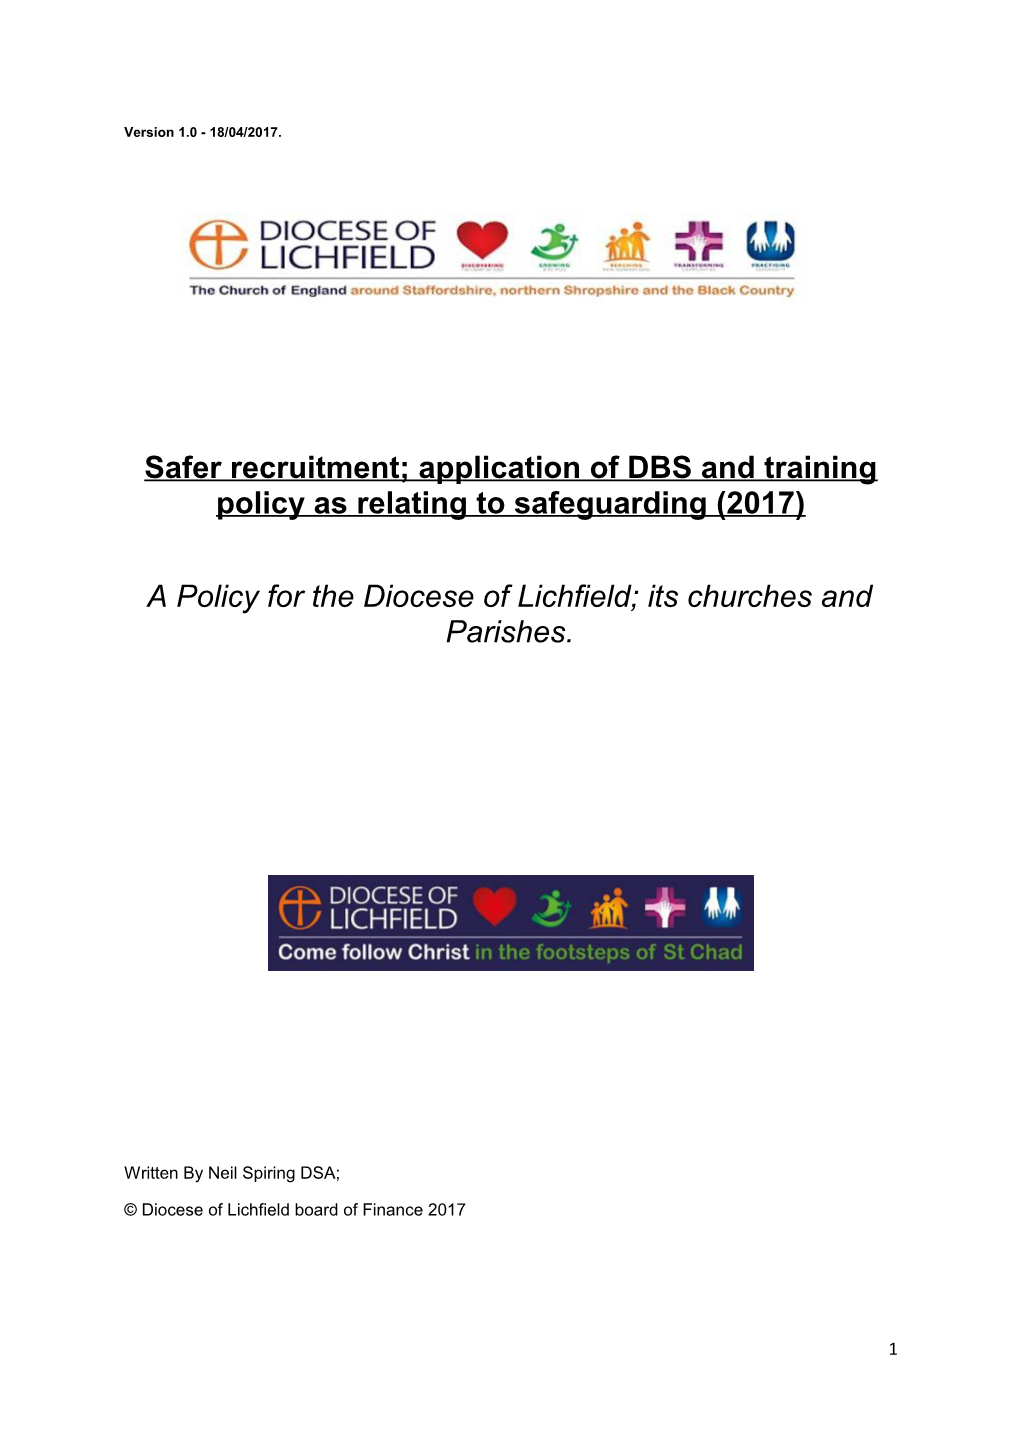 Safer Recruitment; Application of DBS and Training Policy As Relating to Safeguarding (2017)